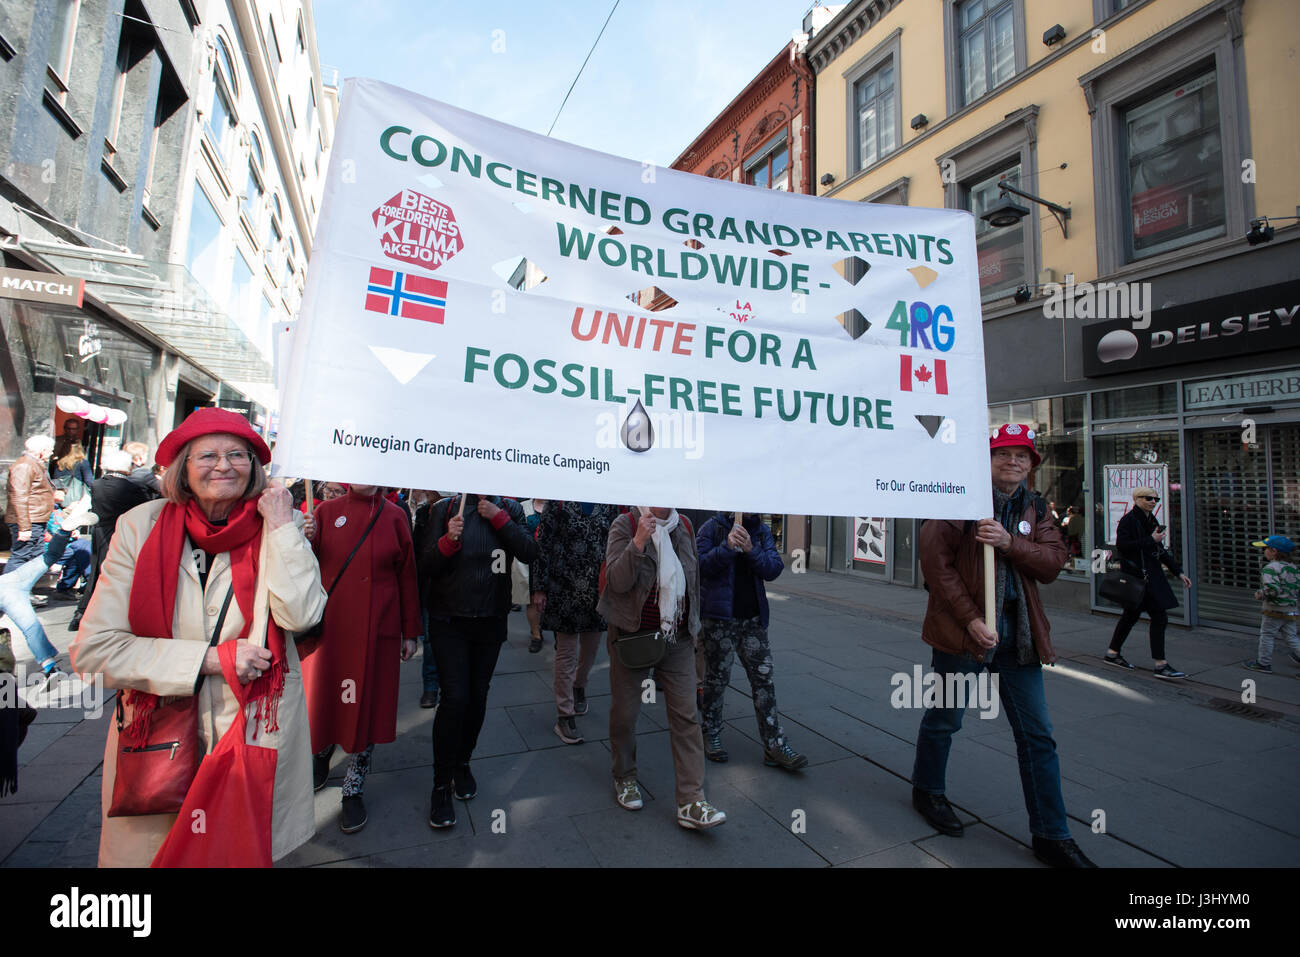 Activists carry a banner reading: 'Concerned Grandparents Worldwide Unite for a Fossil-Free Future' at the annual May Day march in Oslo, Norway, May 1, 2017. Stock Photo